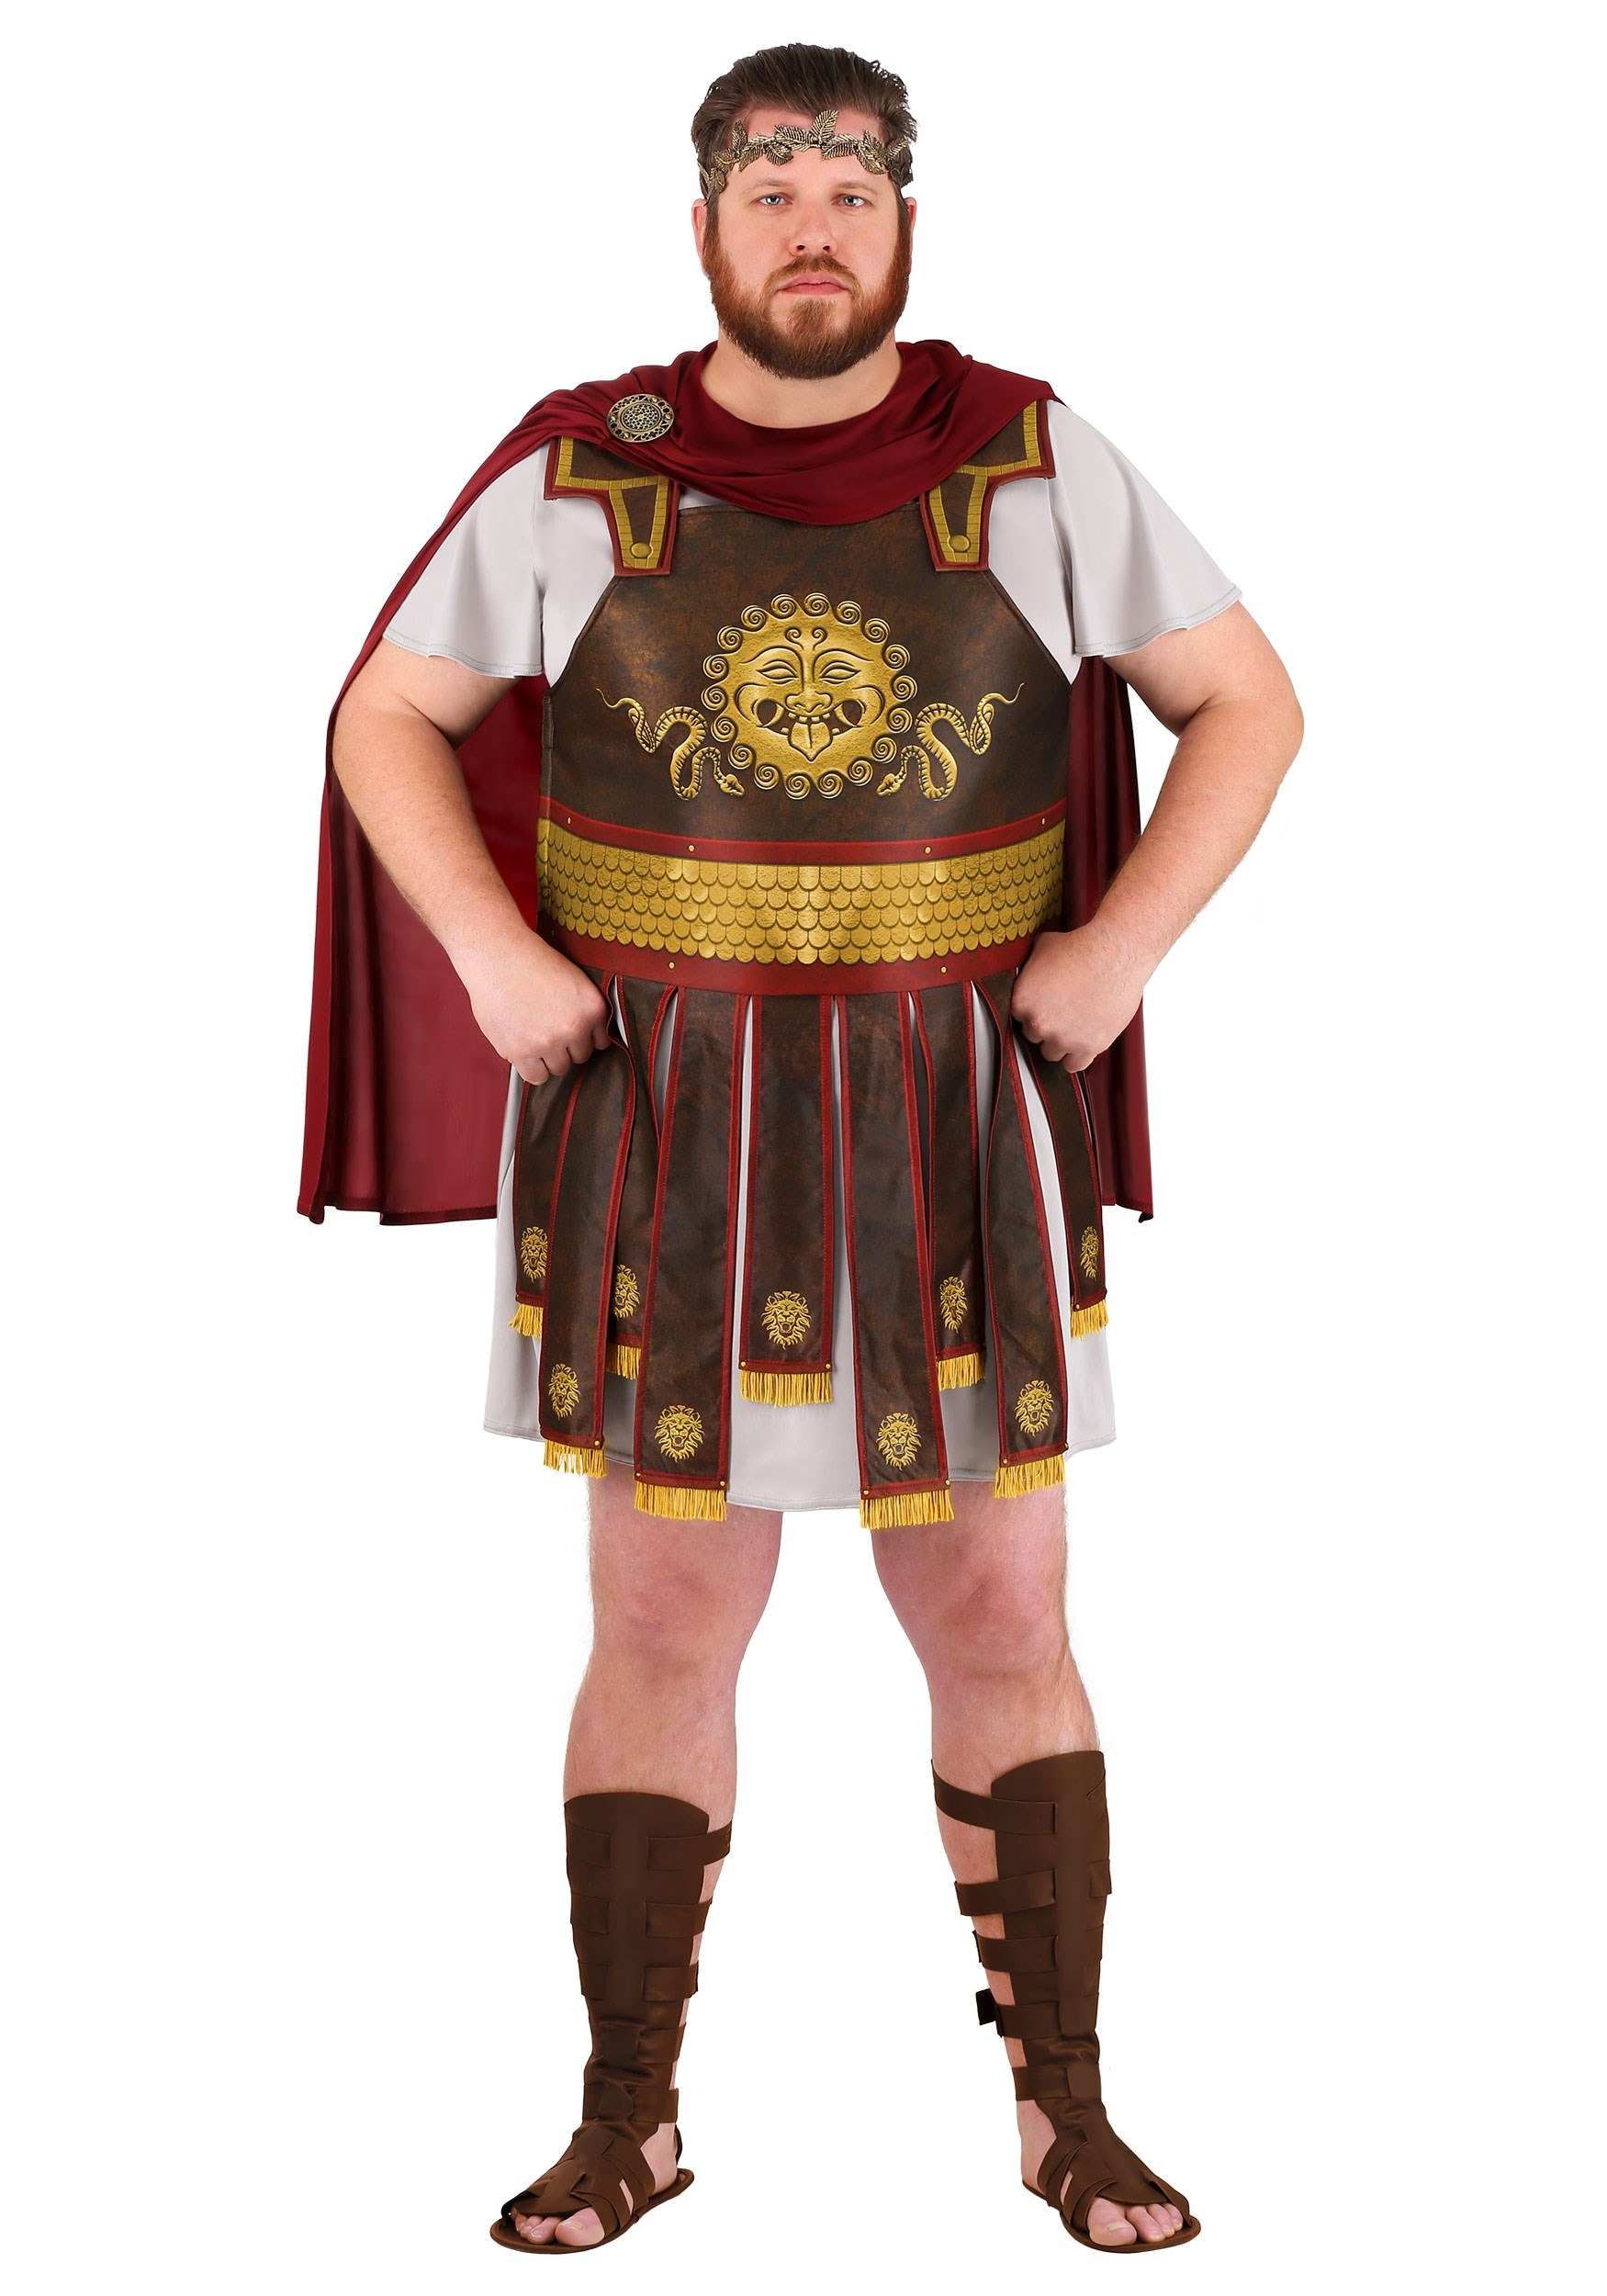 Photos - Fancy Dress Roman FUN Wear Plus Size  Warrior Costume for Adults Brown/Red/Gray 